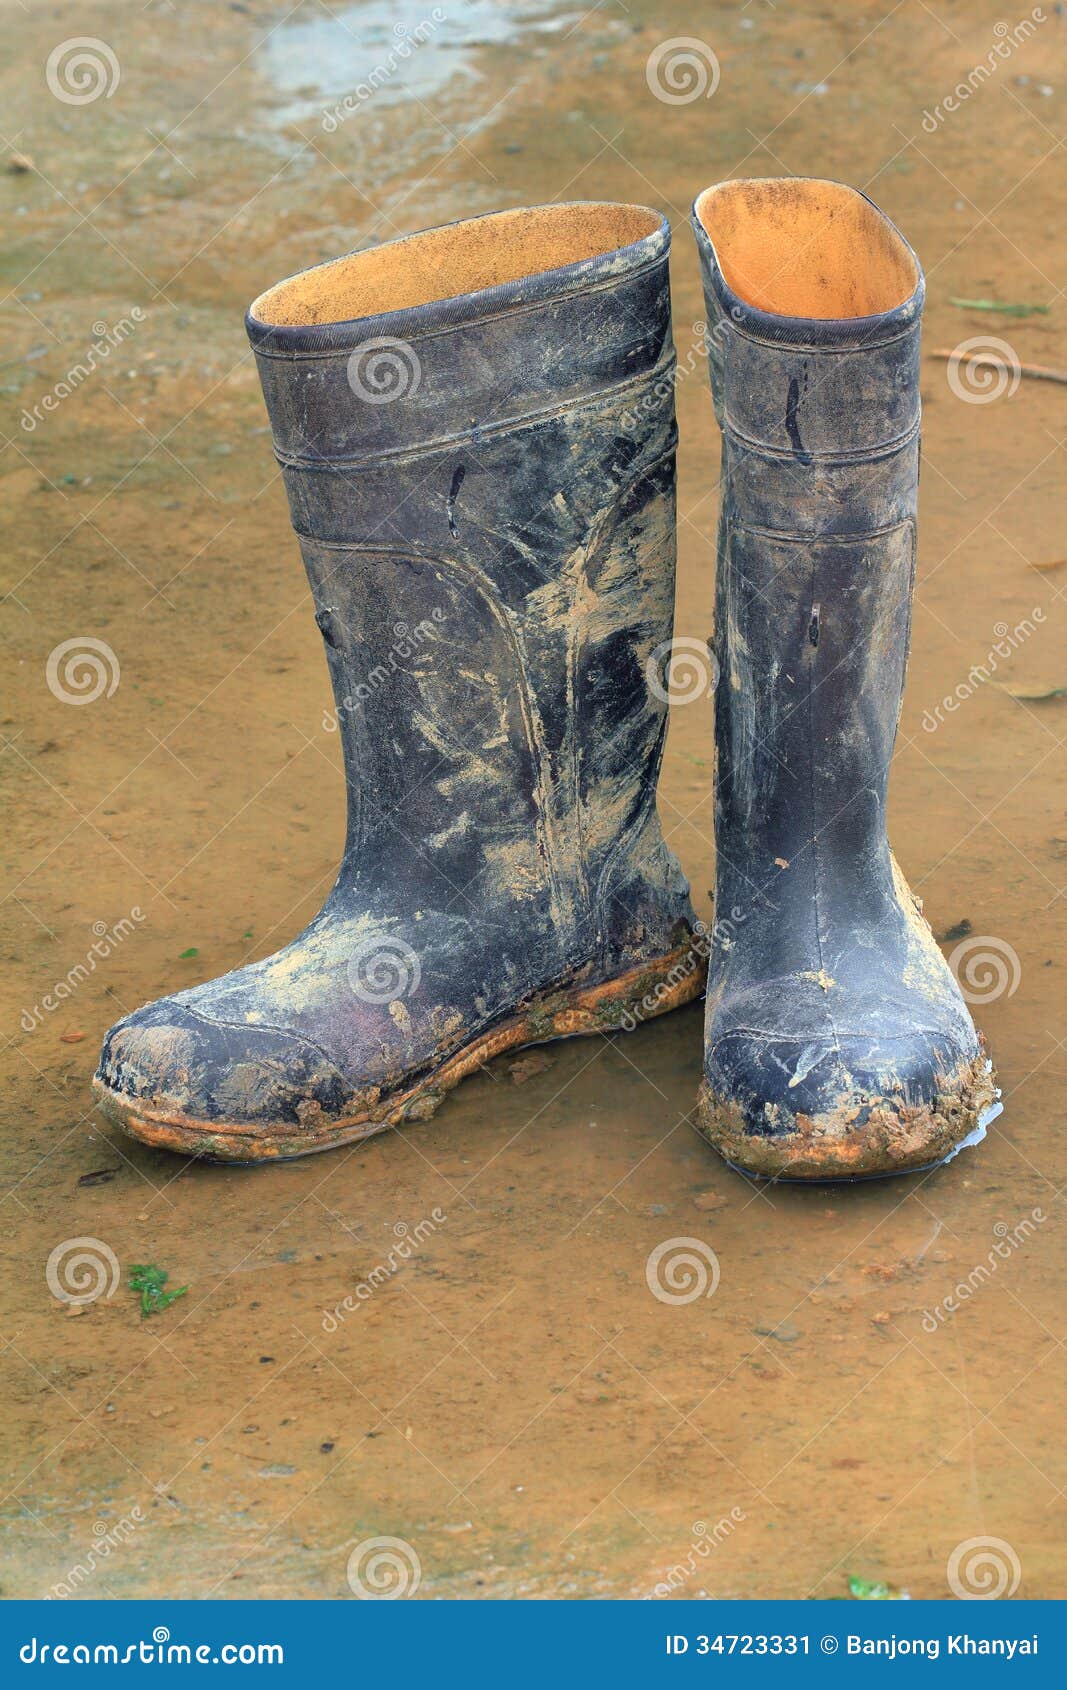 Rubber Boots Stock Image - Image: 34723331